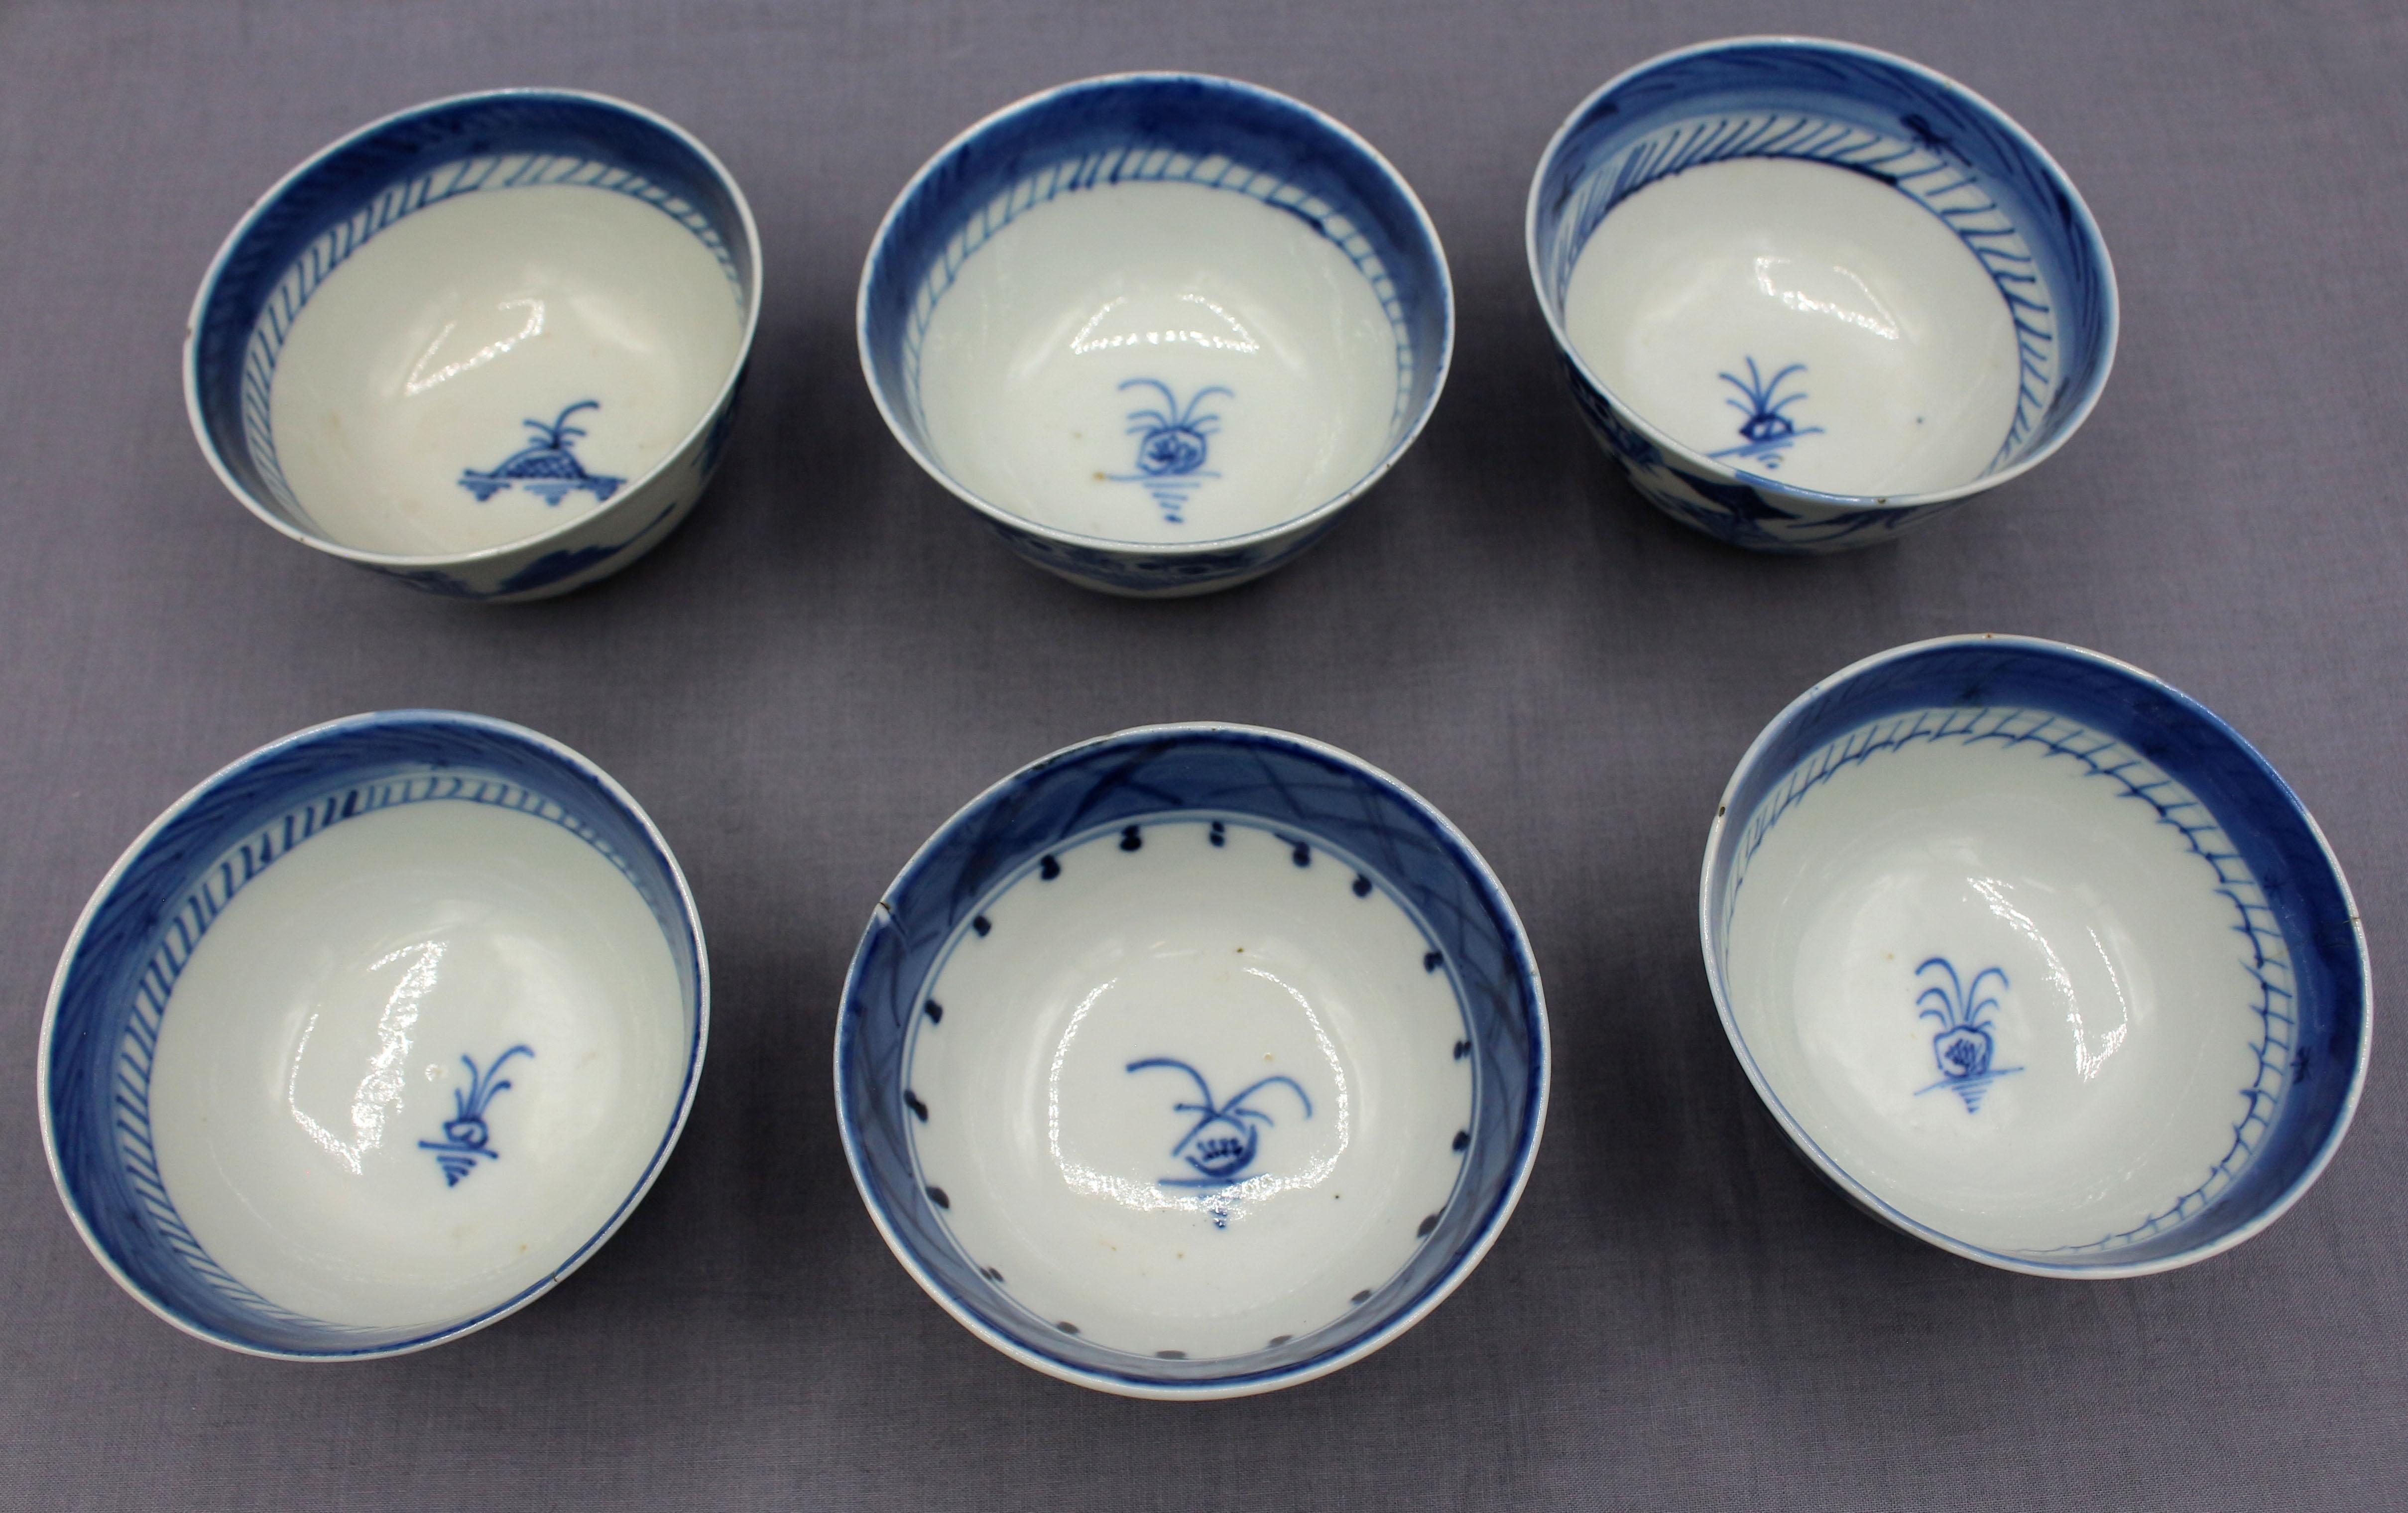 19th century assembled set of 6 Blue Canton small rice or soup bowls, Chinese export. Porcelain. 3 hairlines; minute chips & firing flaws.
3 3/4